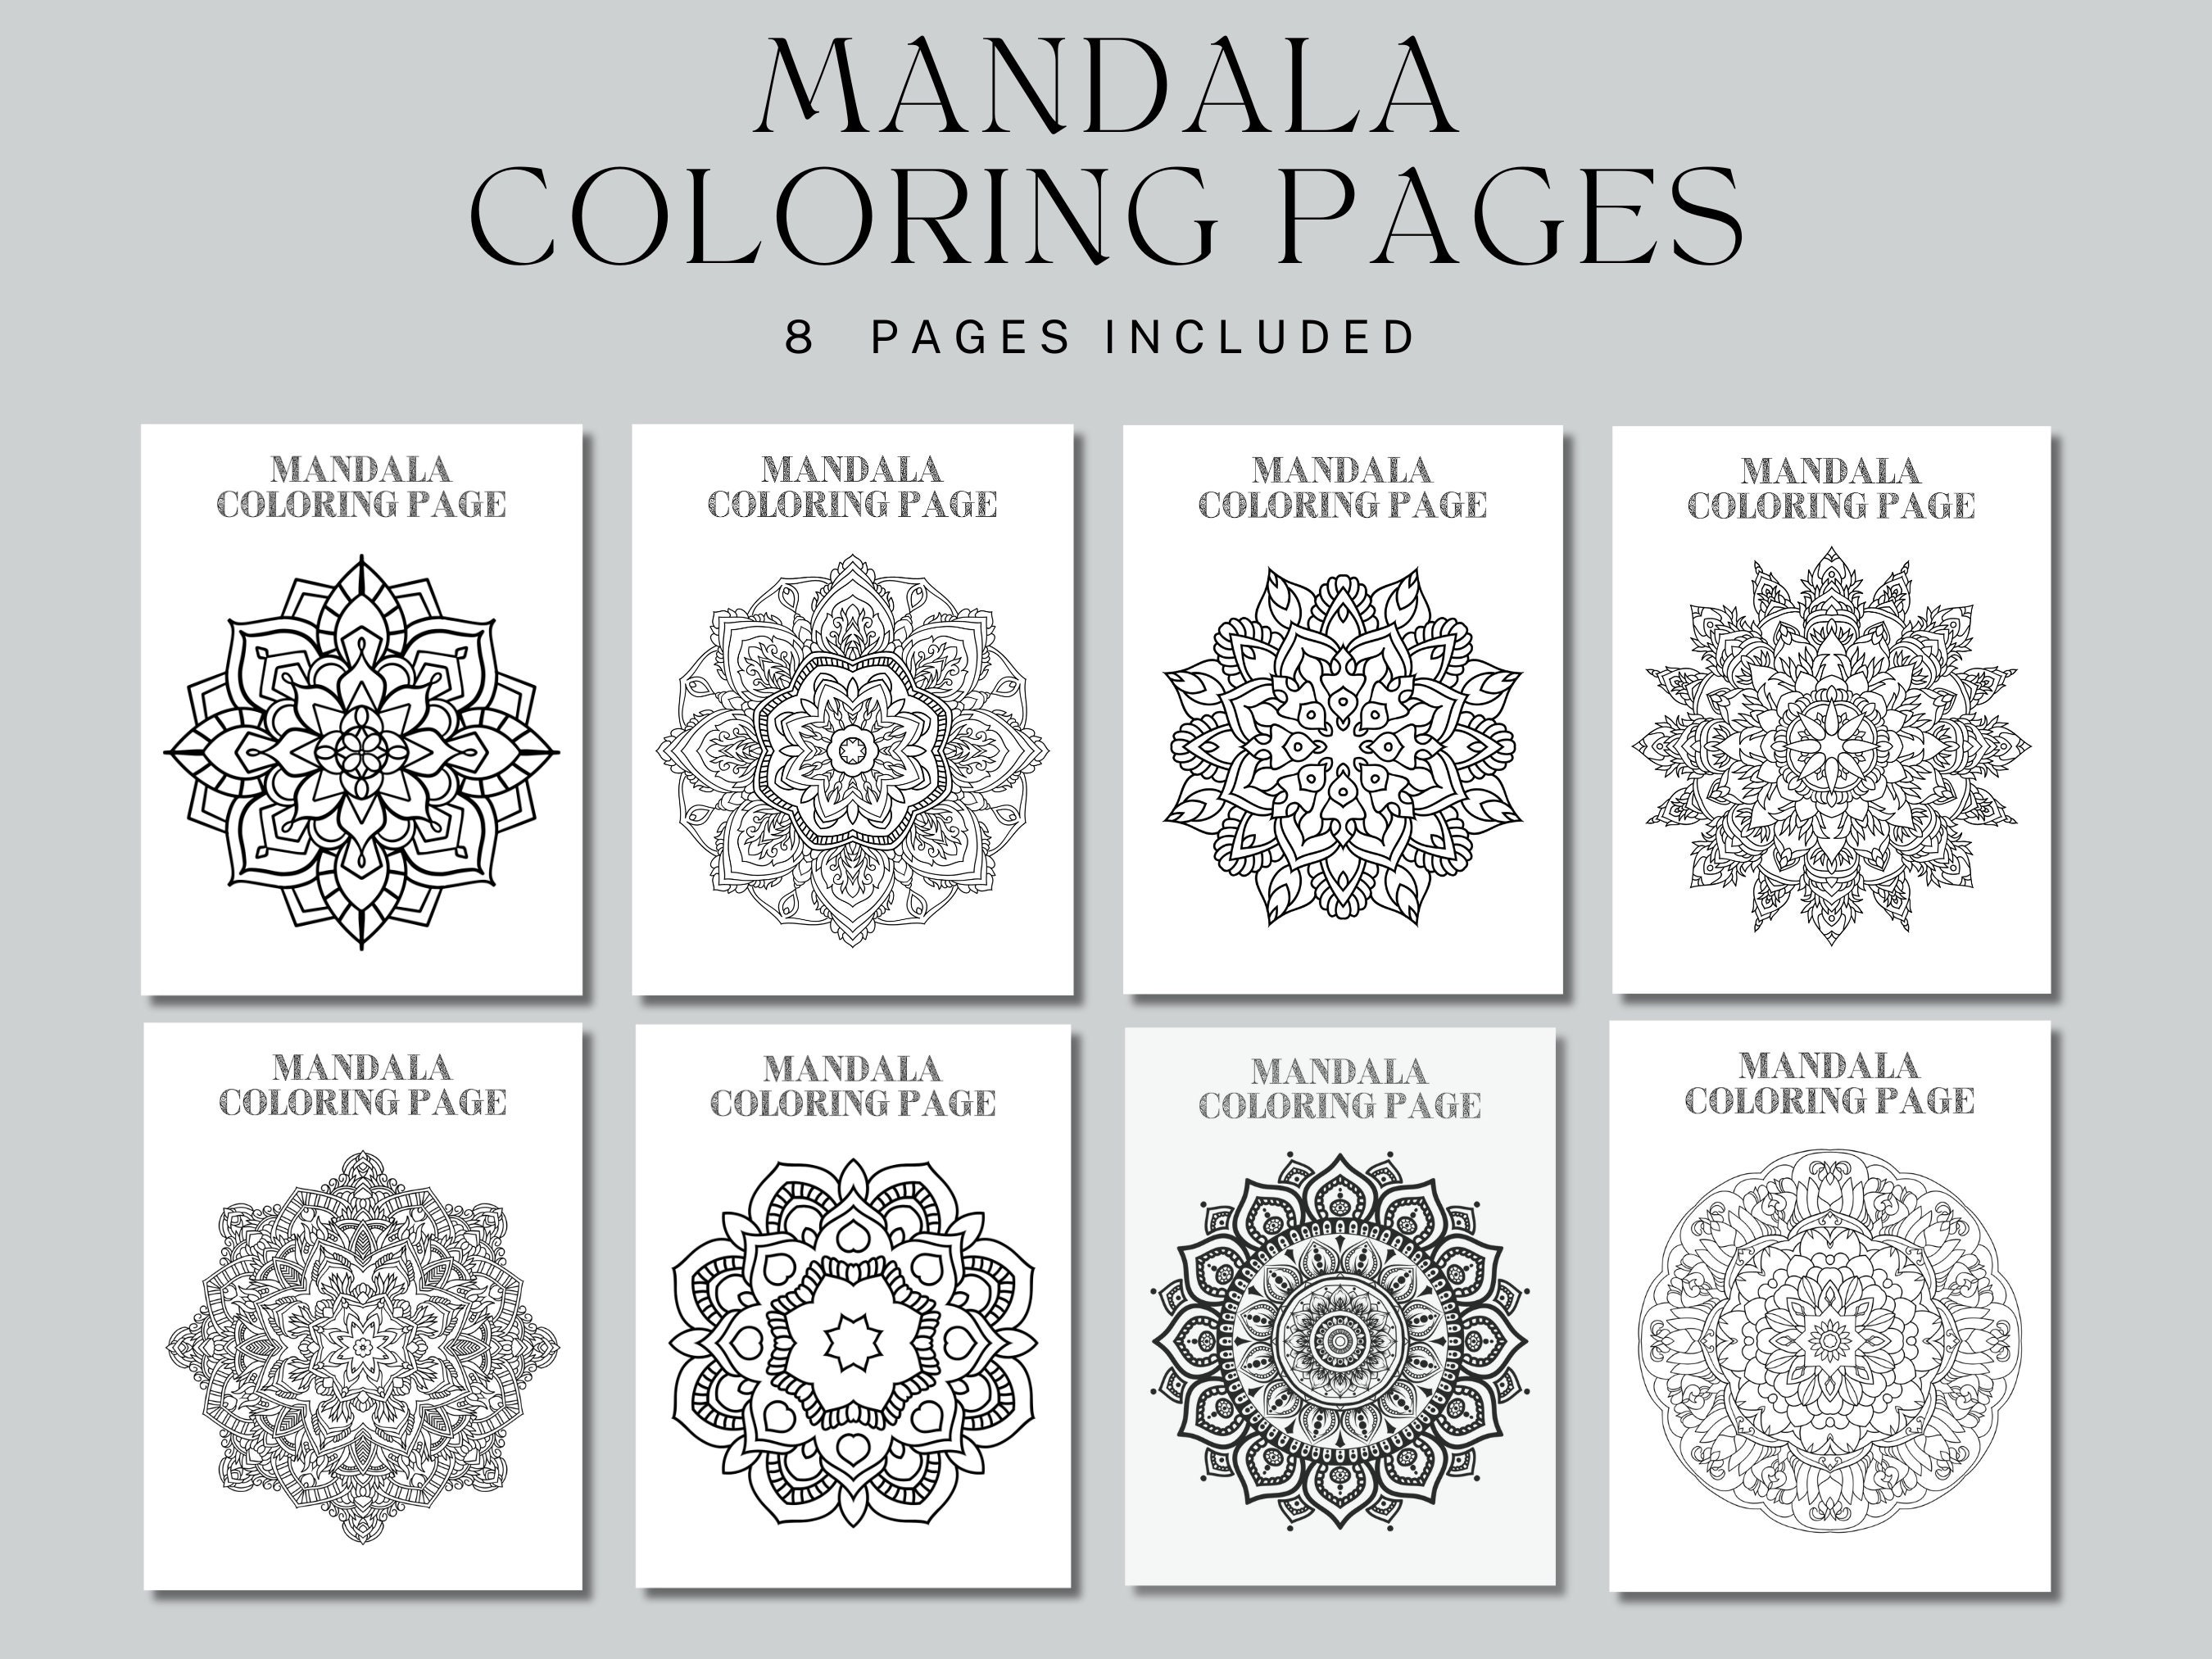 Reverse Coloring Book for Adults Anxiety Relief: Color in Reverse